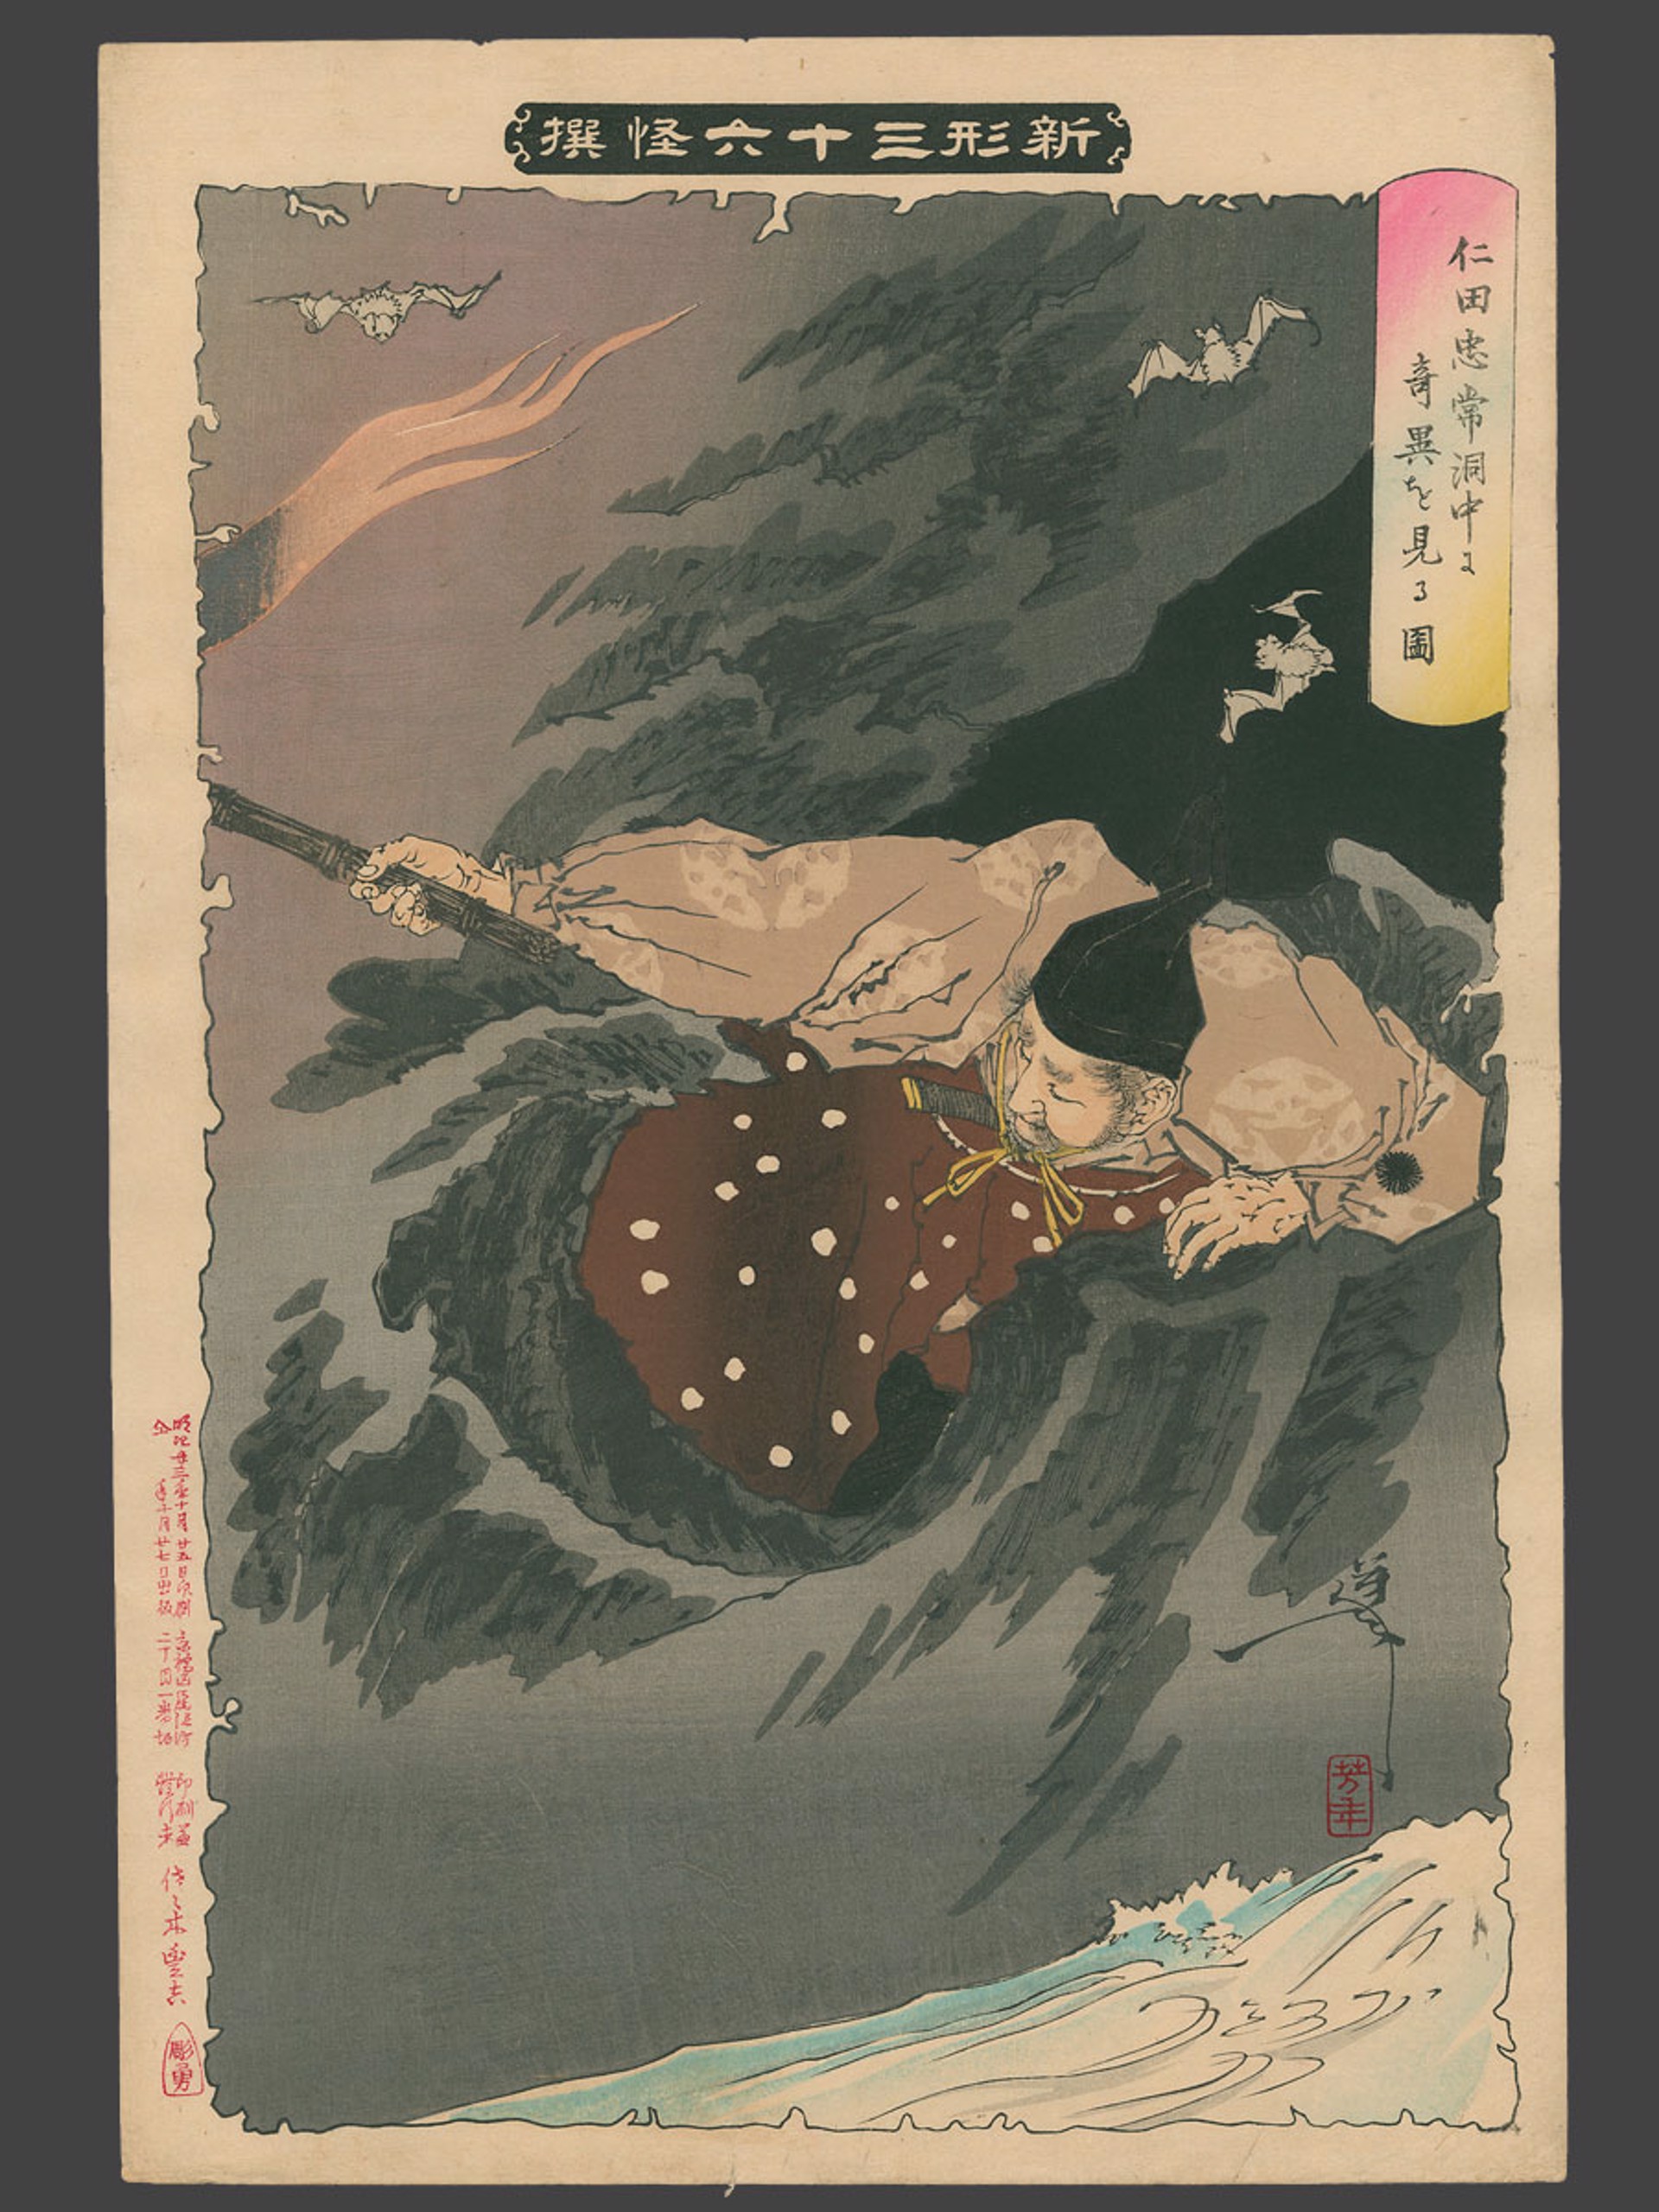 Nitta Tadatsune Sees an Apparition in a Cave 36 Ghosts by Yoshitoshi